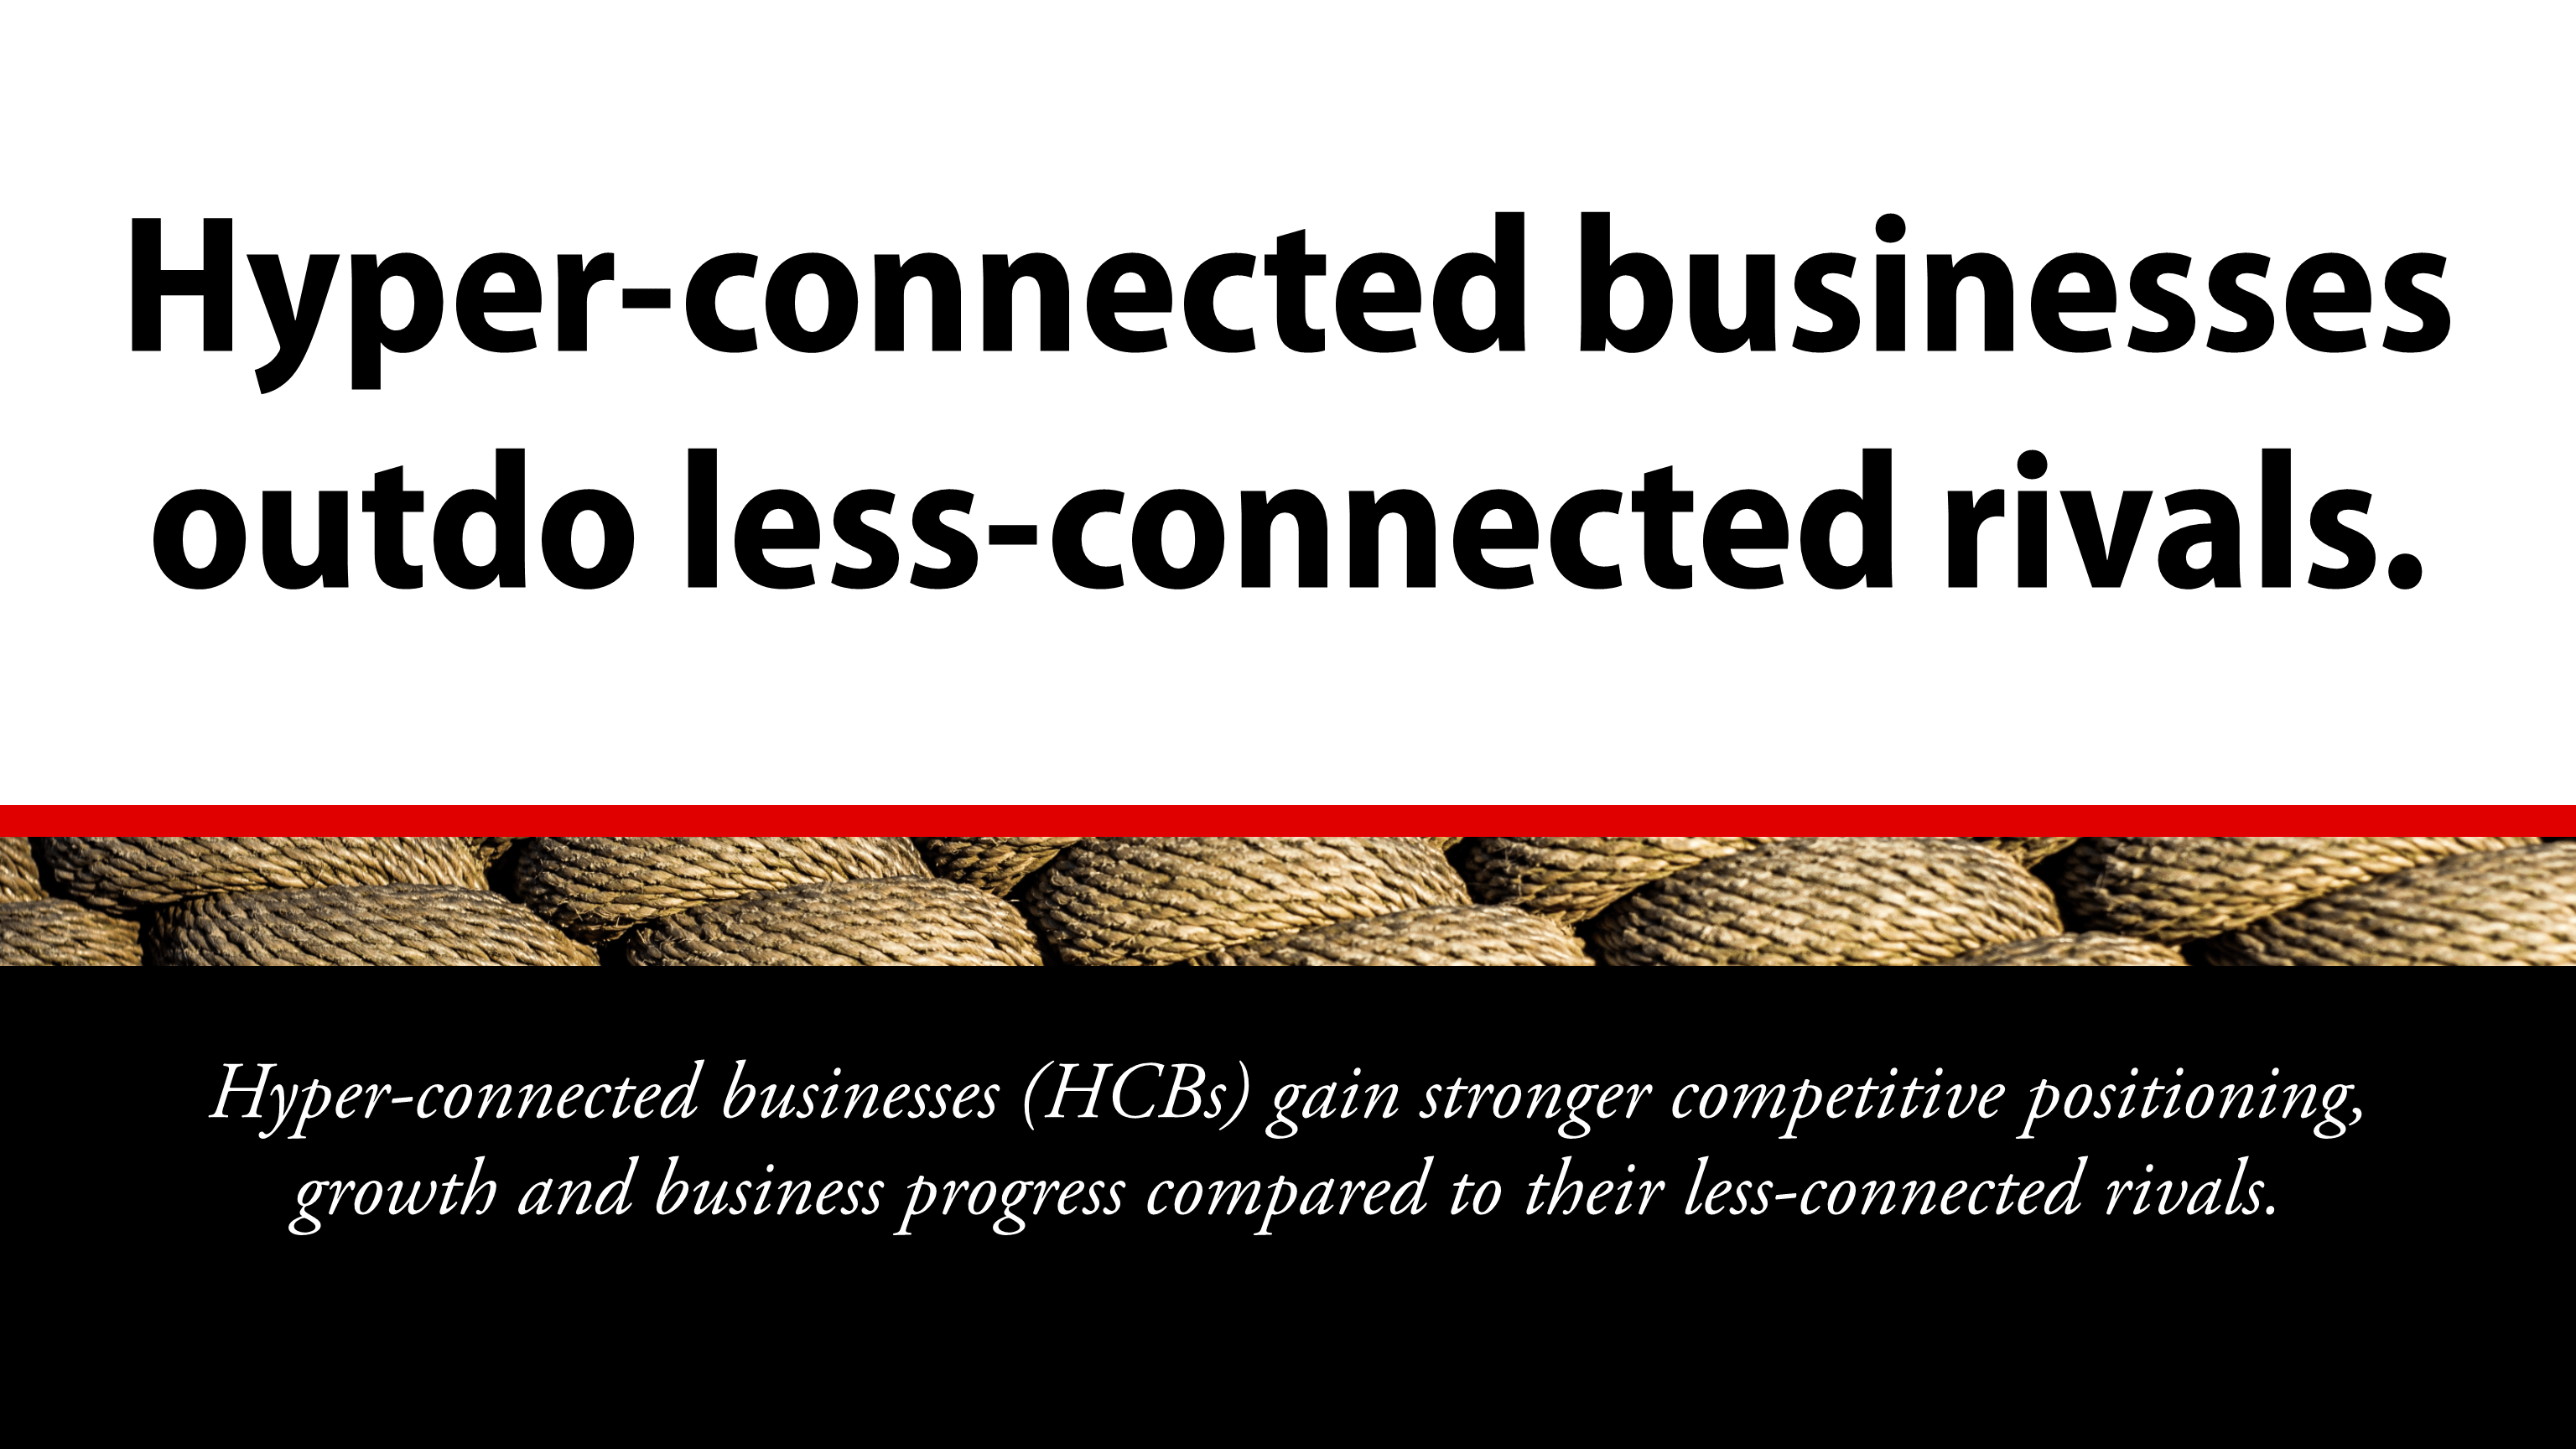 Hyper-connected businesses outdo